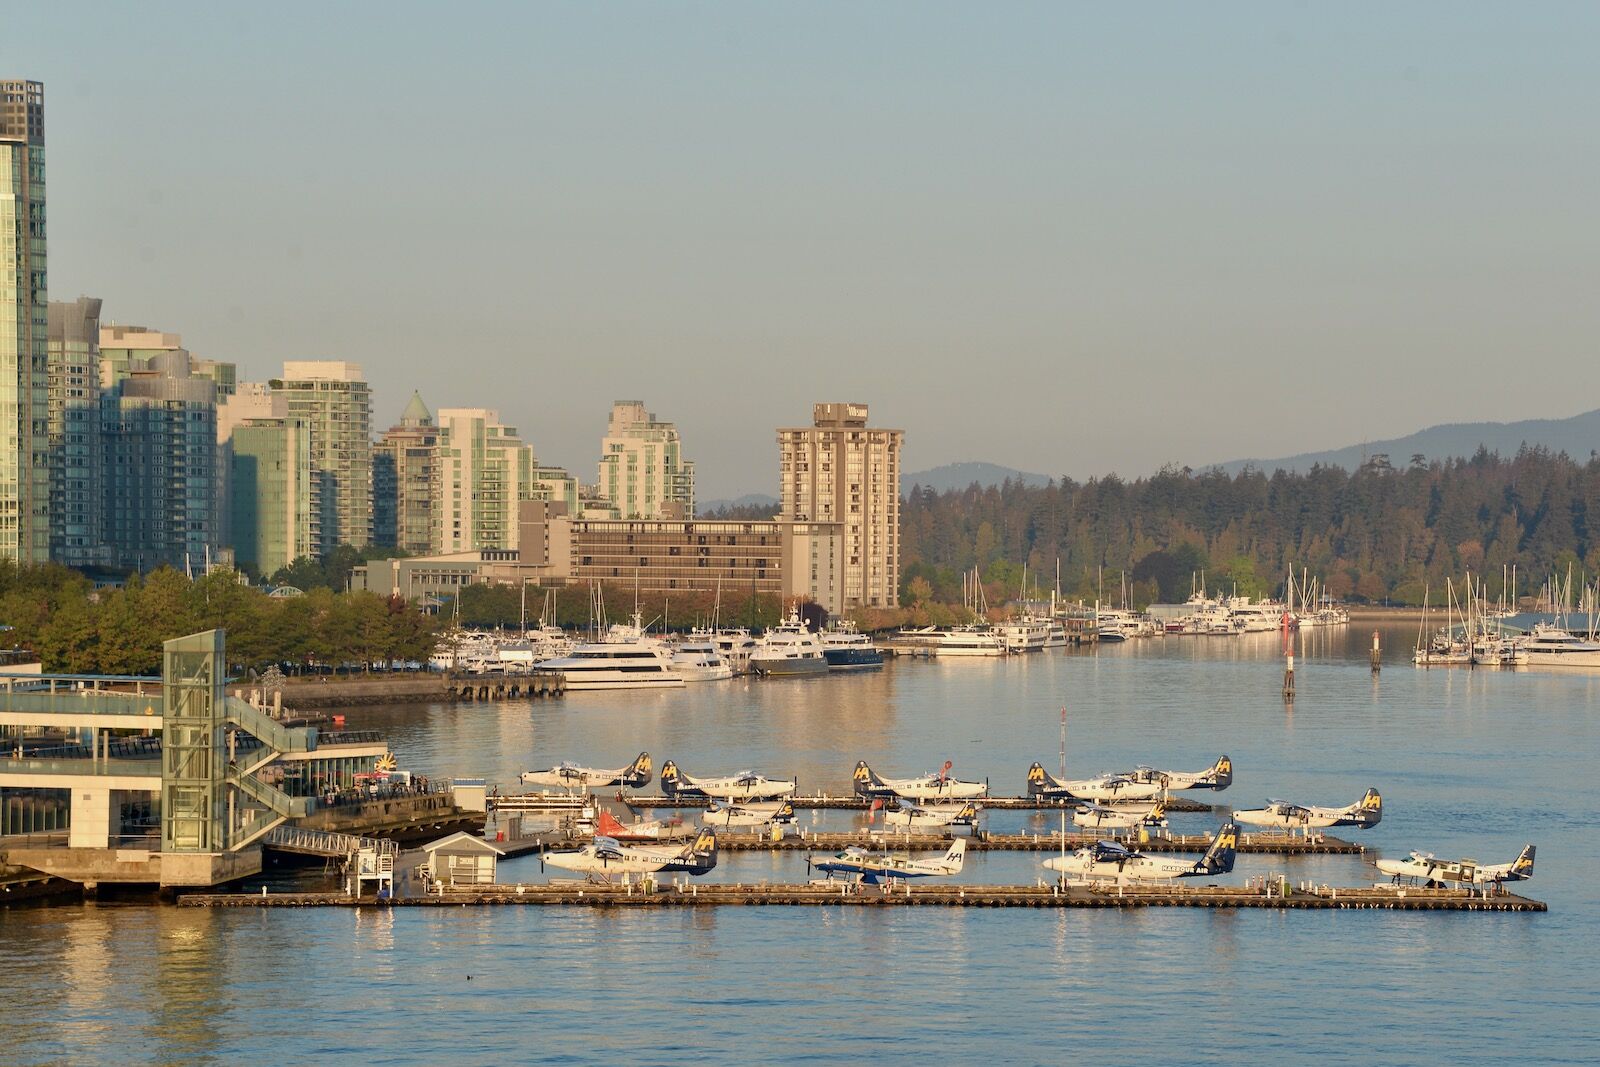 Float plane airport in downtown Vancouver, Canada